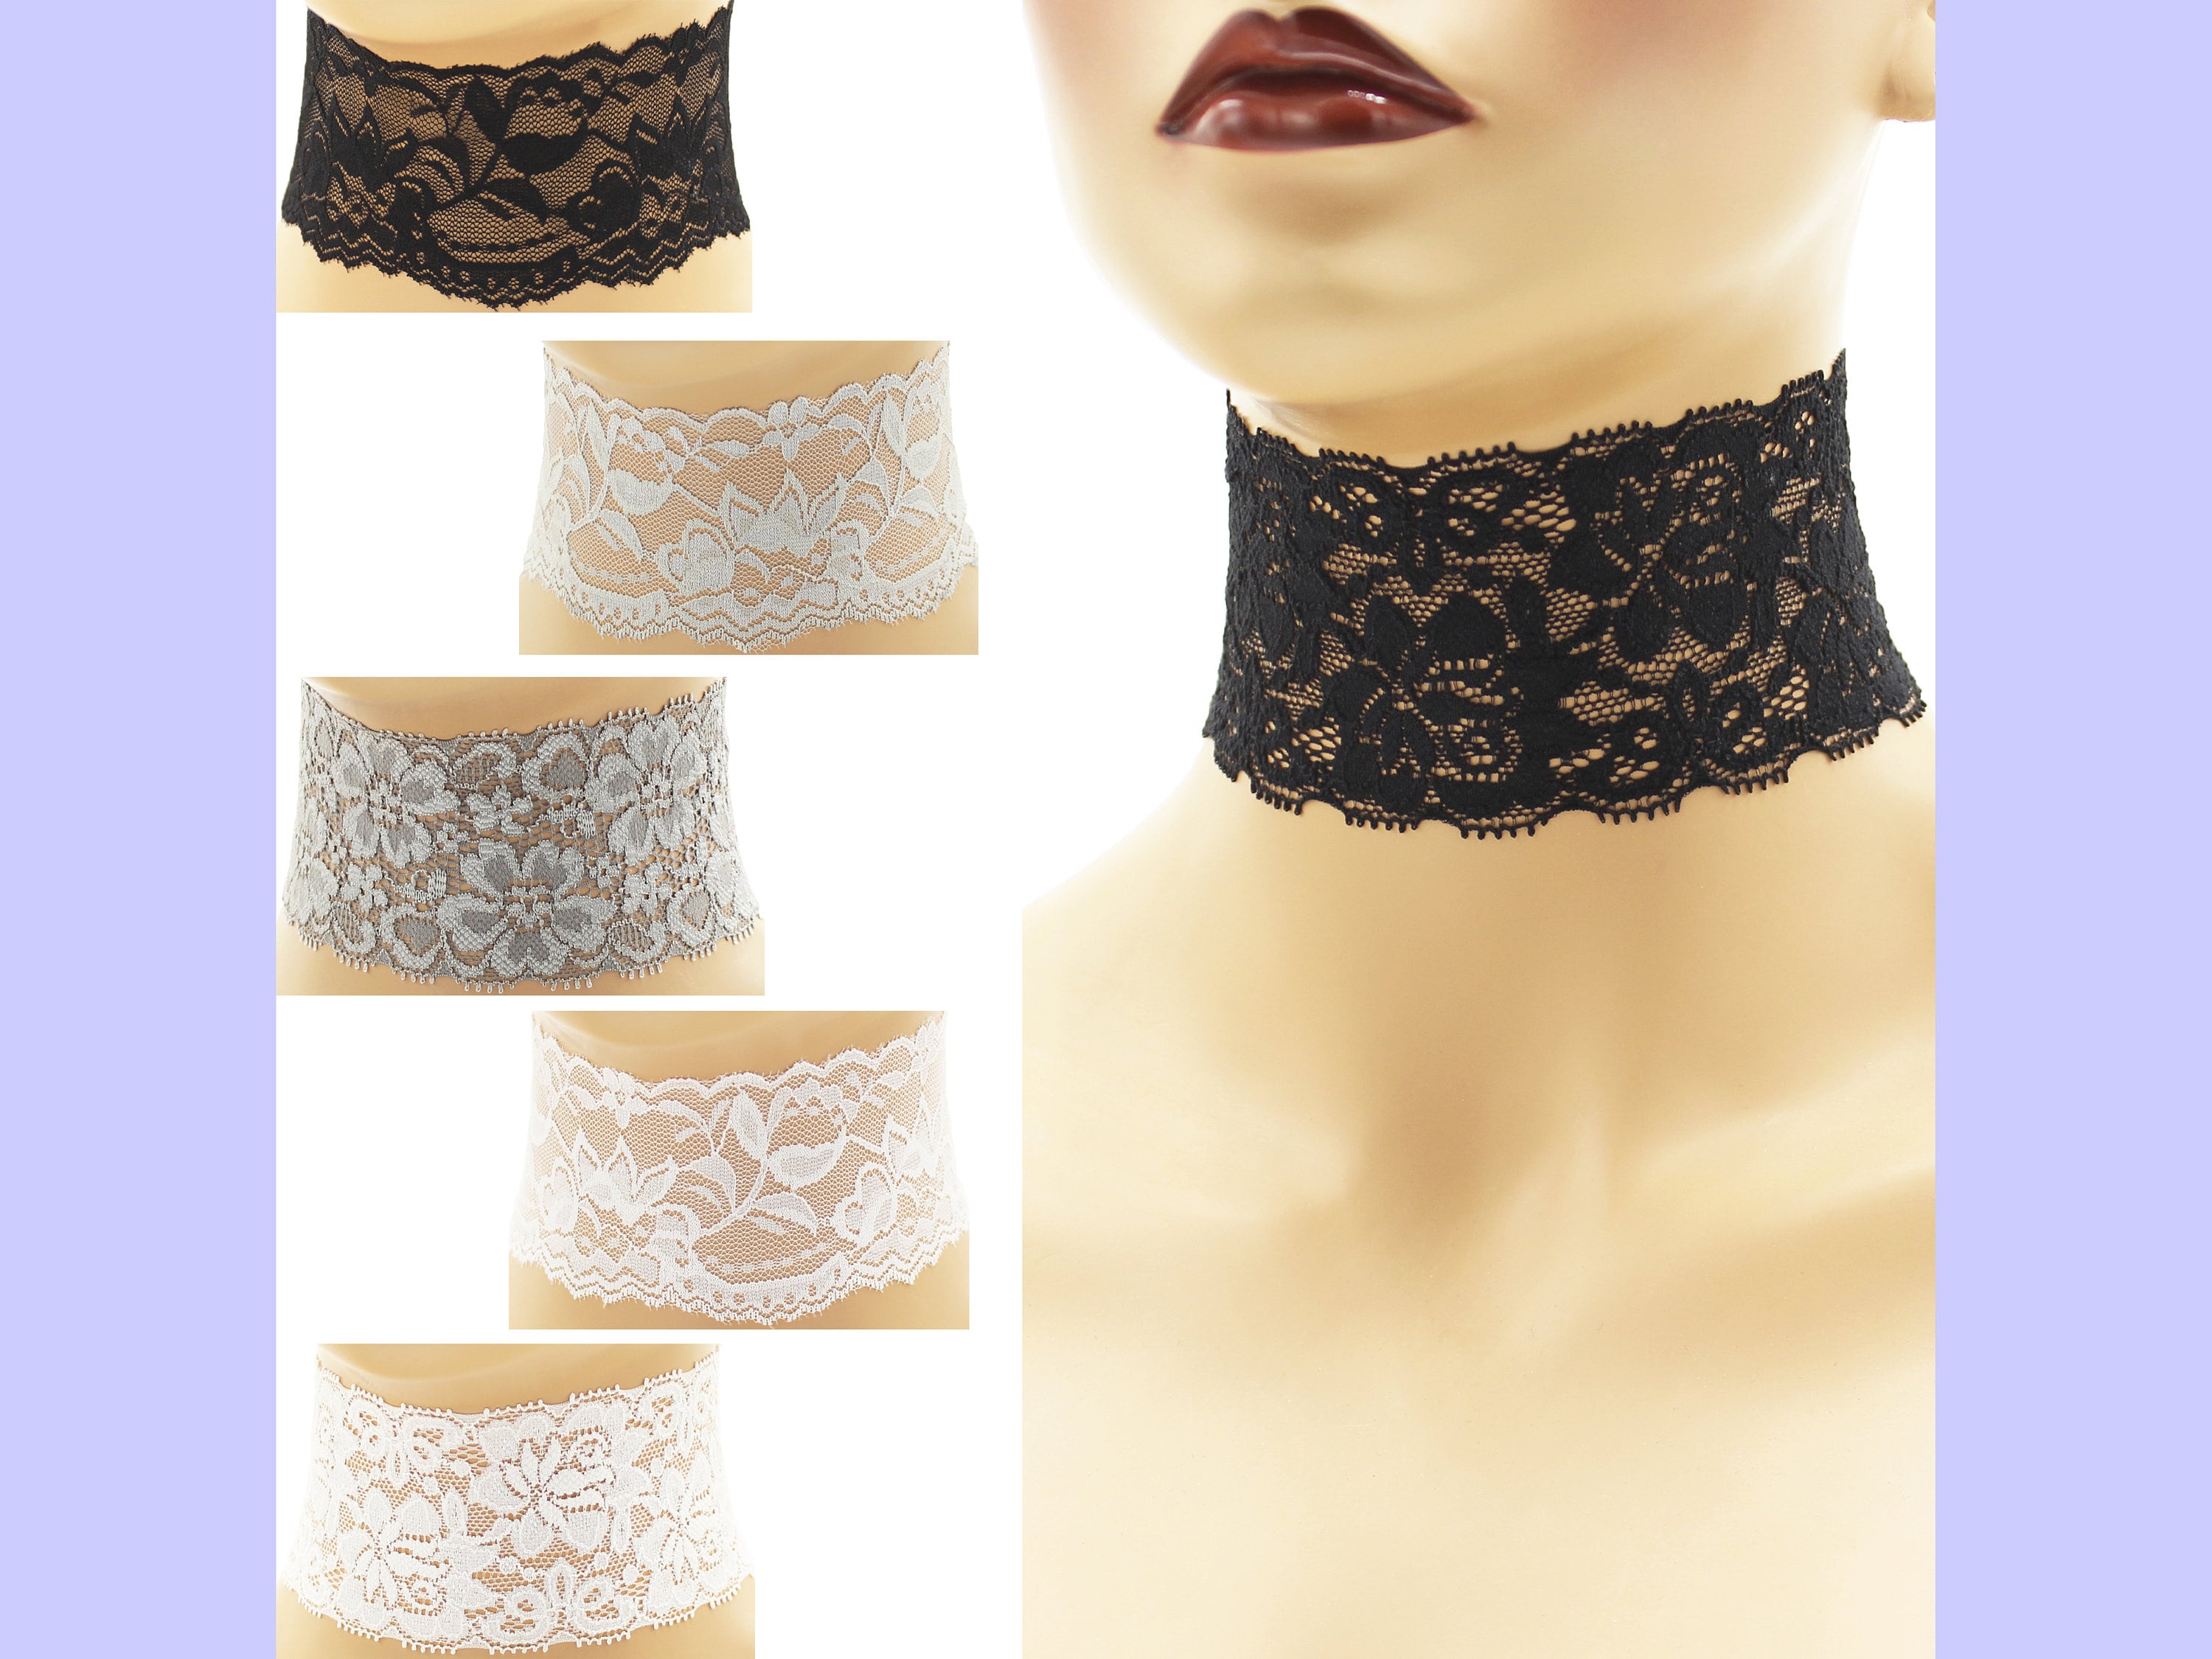 Wide Black Lace Choker, Scalloped Lace Victorian Choker, Dainty Gothic  Necklace, Goth Jewelry 